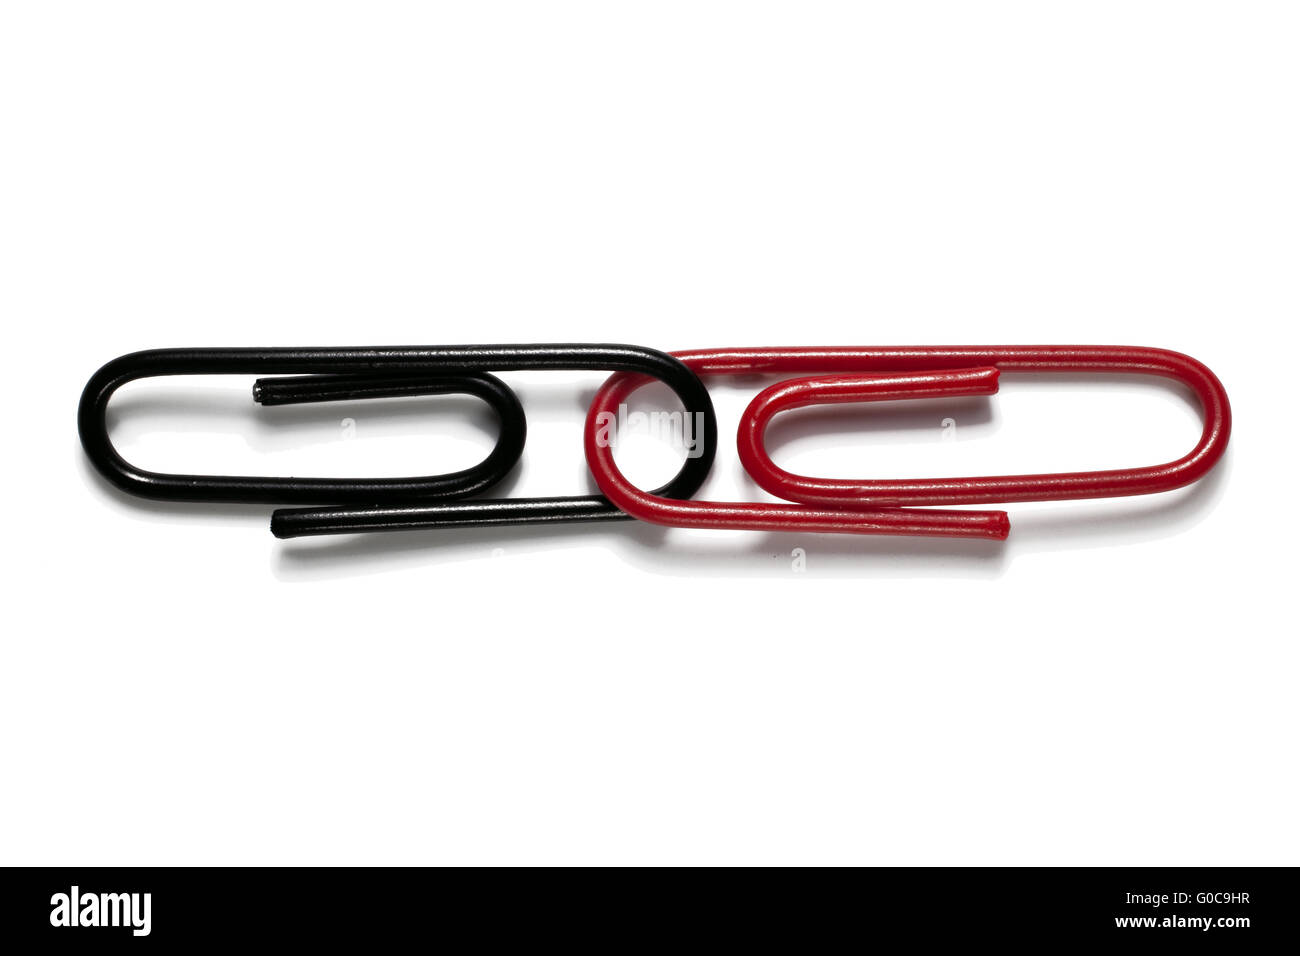 Black and red paper clips, symbolic image Stock Photo